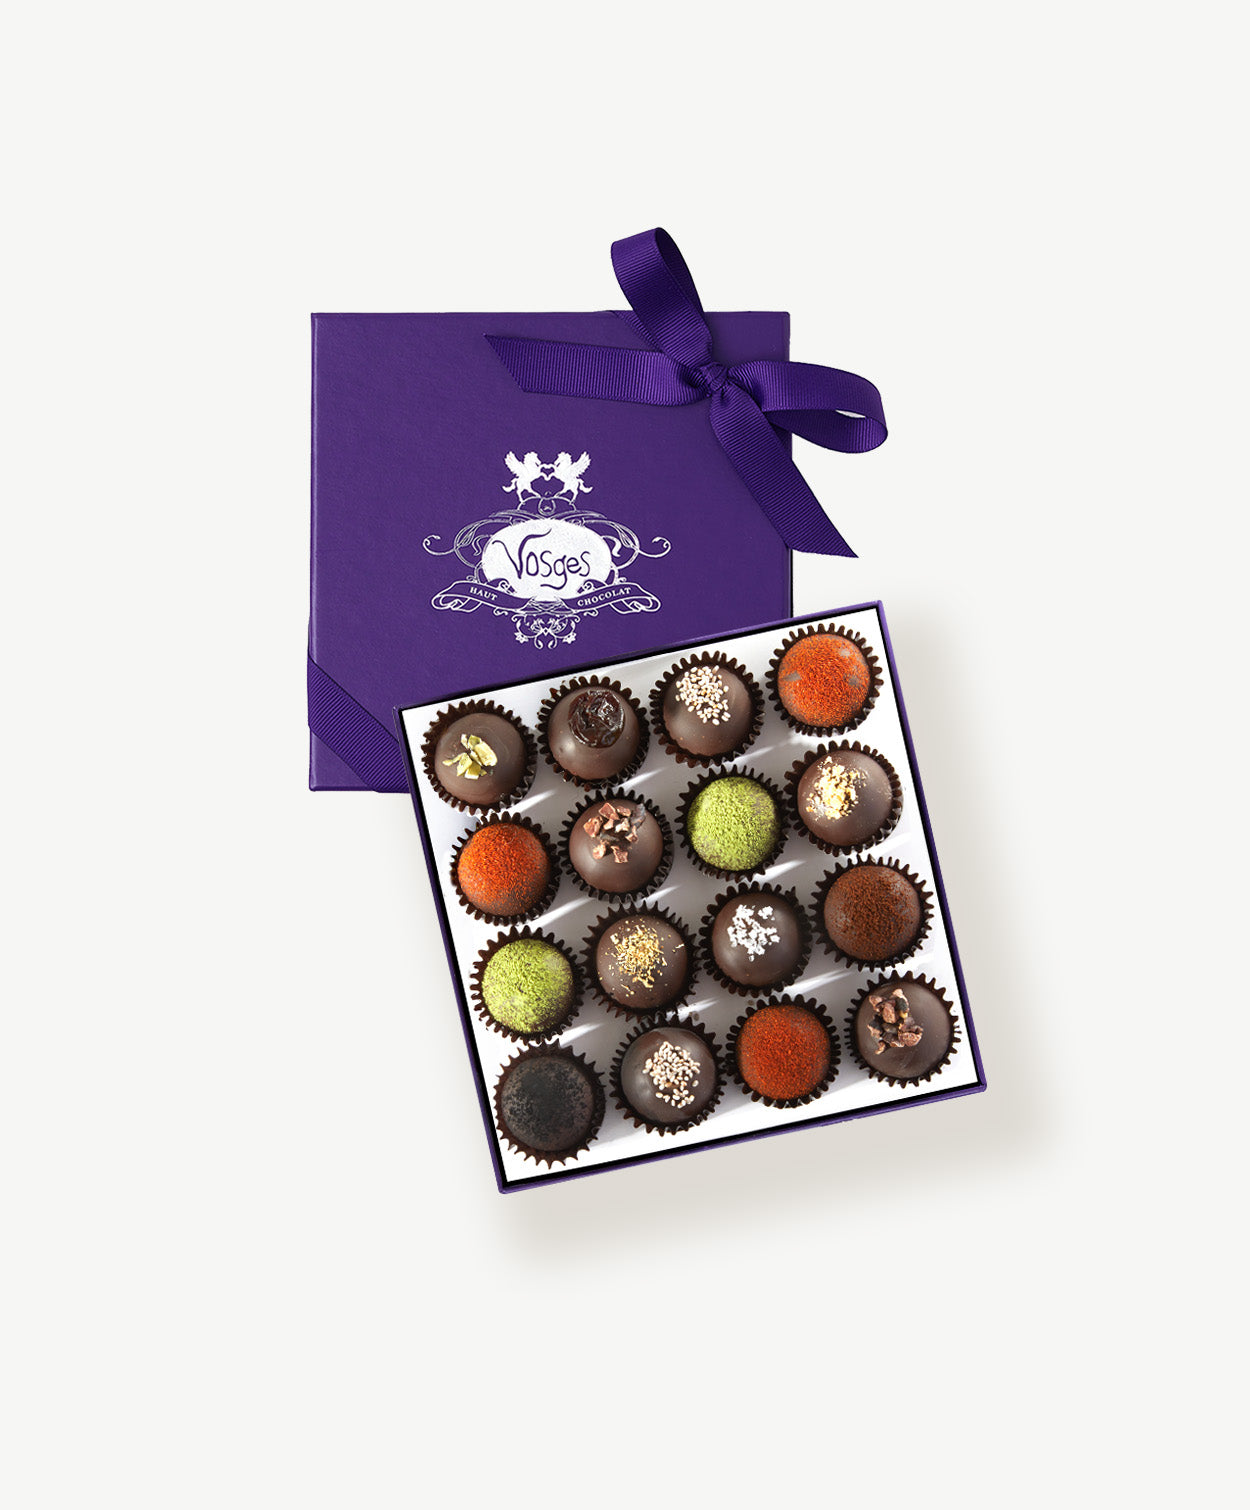 An open purple candy box embossed in silver foil tied with a purple ribbon bow sits open displaying sixteen dark chocolate truffles adorned in brightly colored spices and chopped nuts on a grey background.